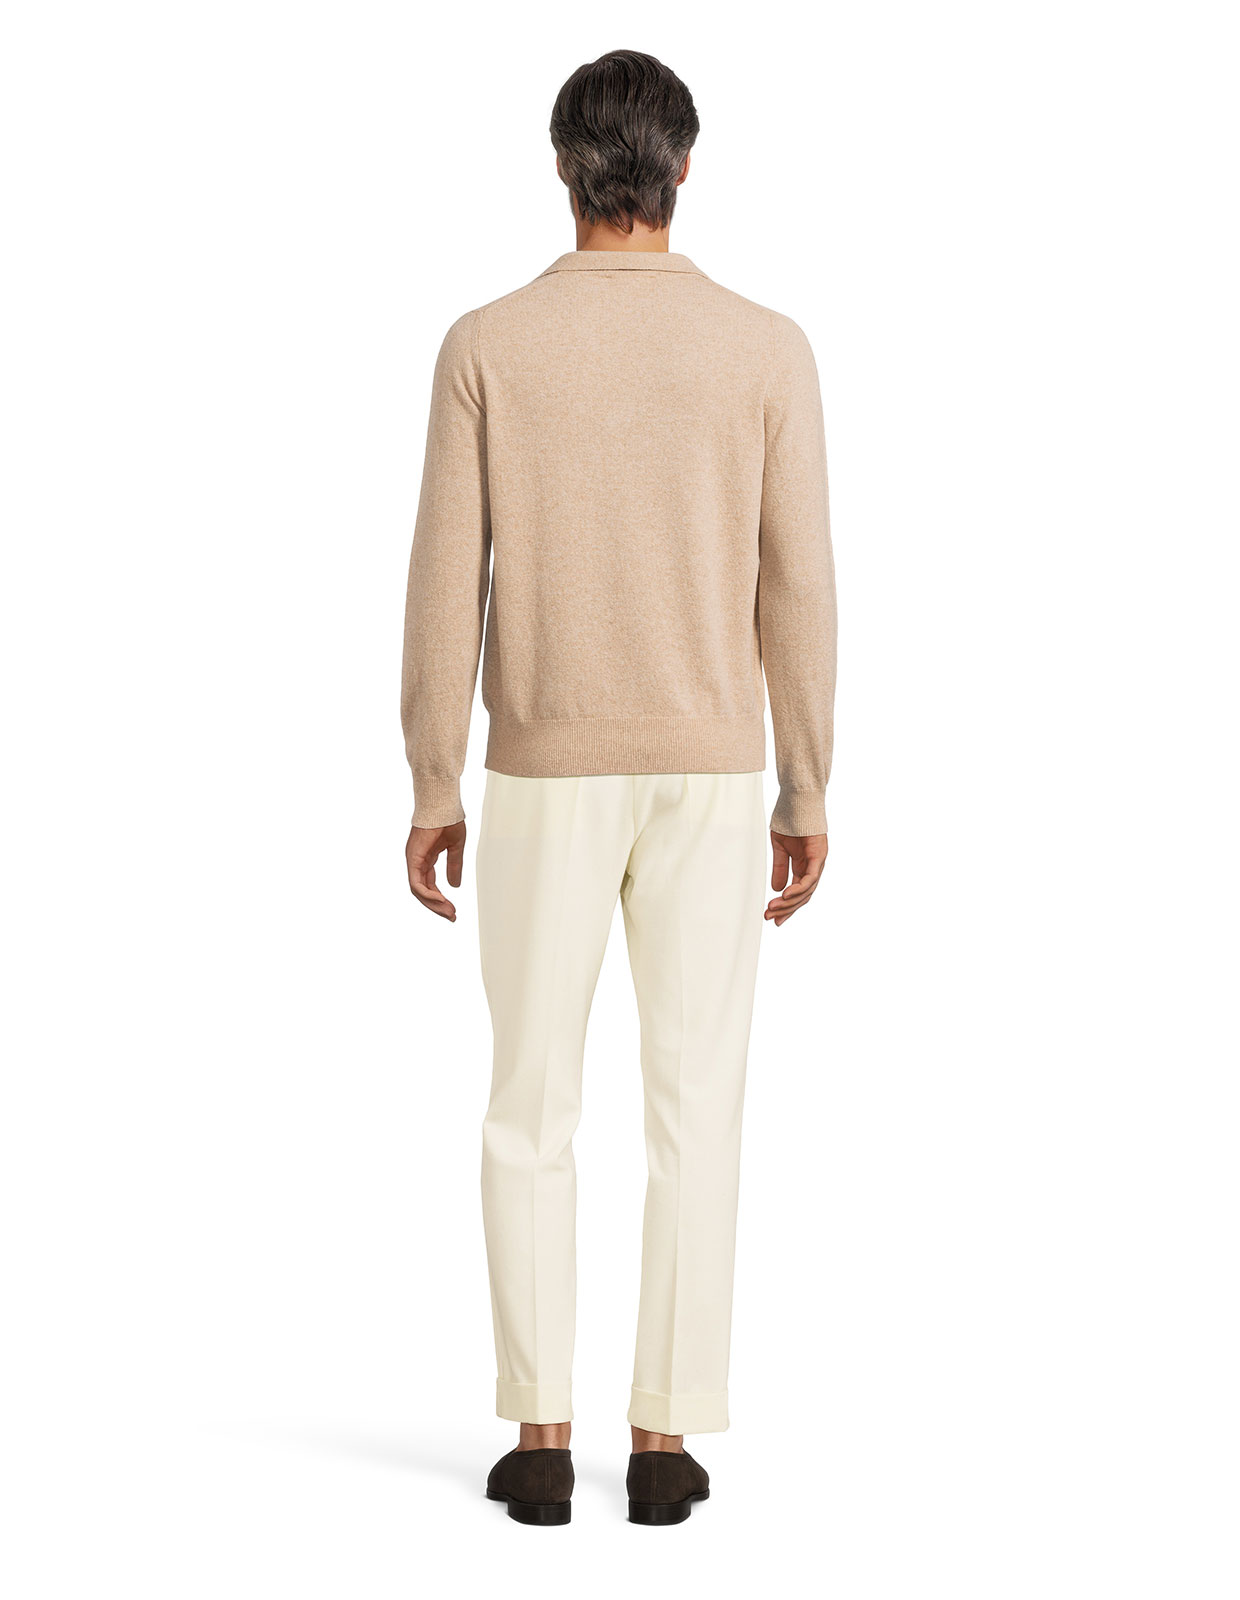 Open Polo Tröja Ull/Cashmere Beige